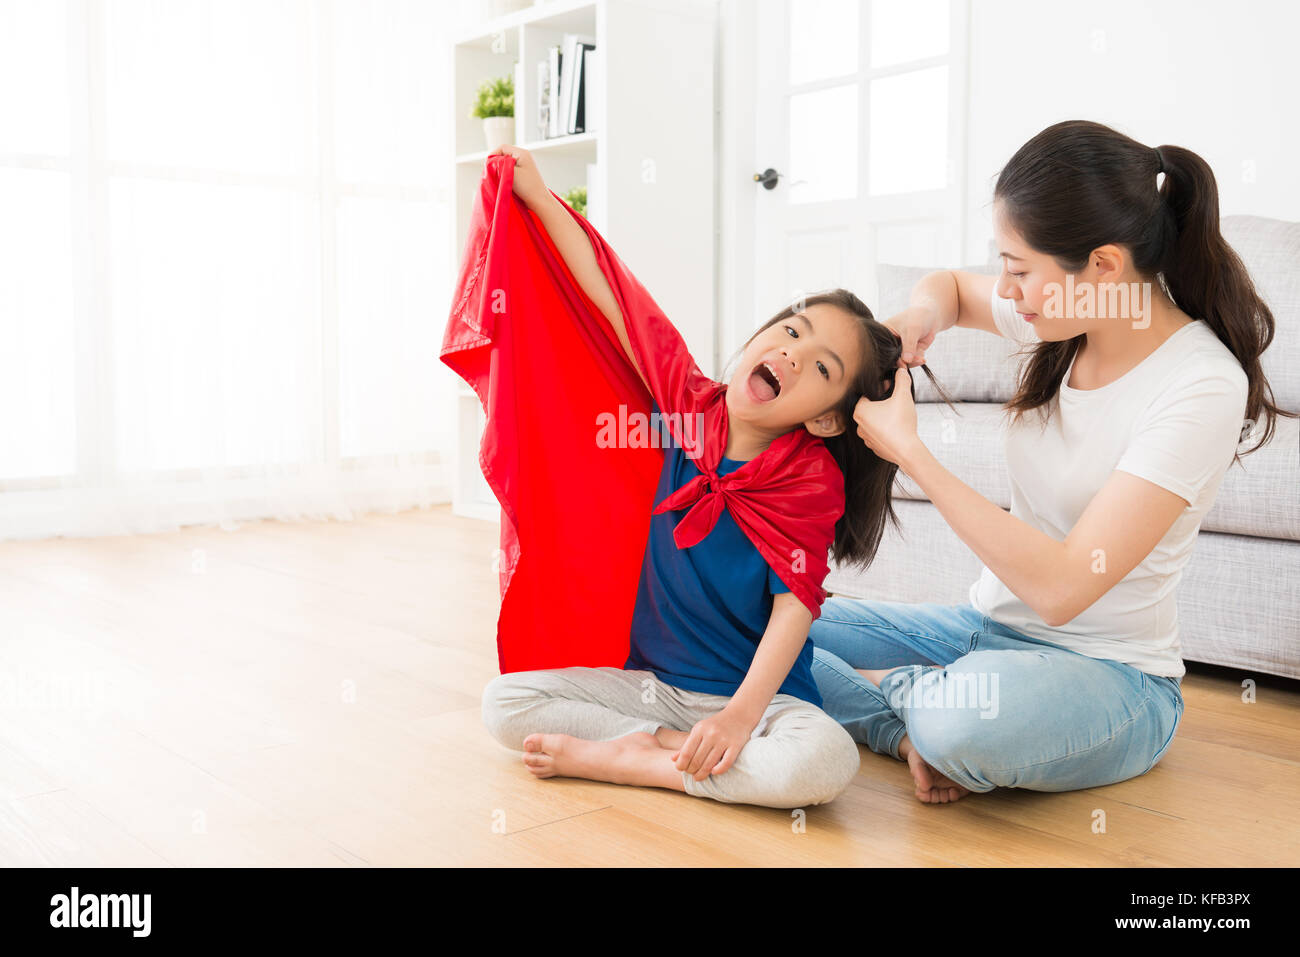 young smiling mother helping little girl tied hair in living room when daughter want to play as superhero at home with red cape. Stock Photo